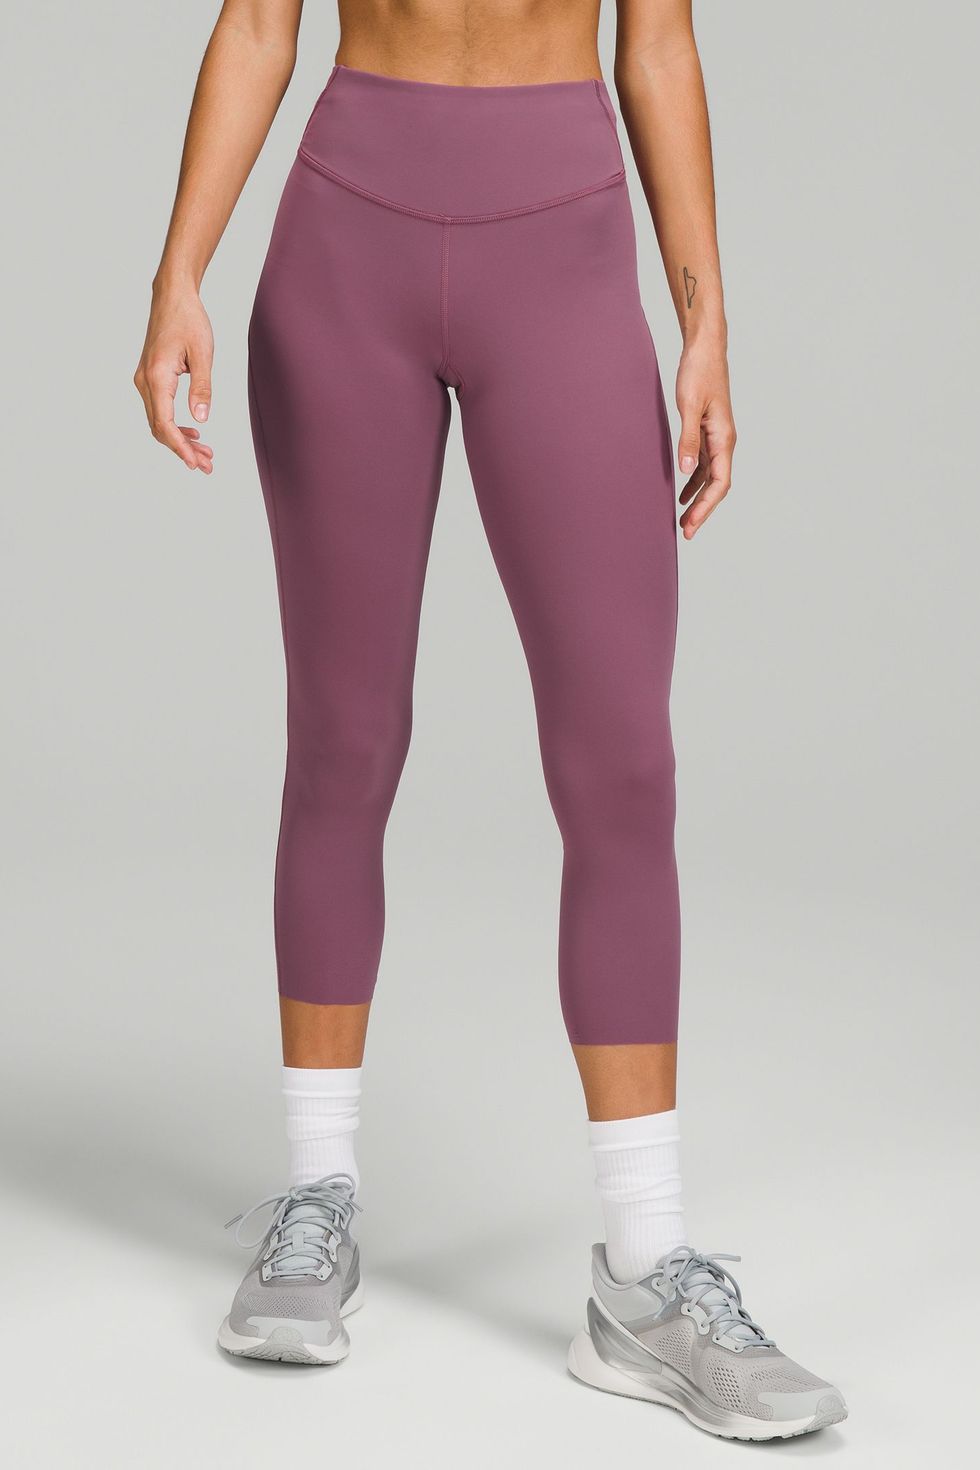 Which Lululemon Leggings Are Best for Everyday Wear? - Playbite